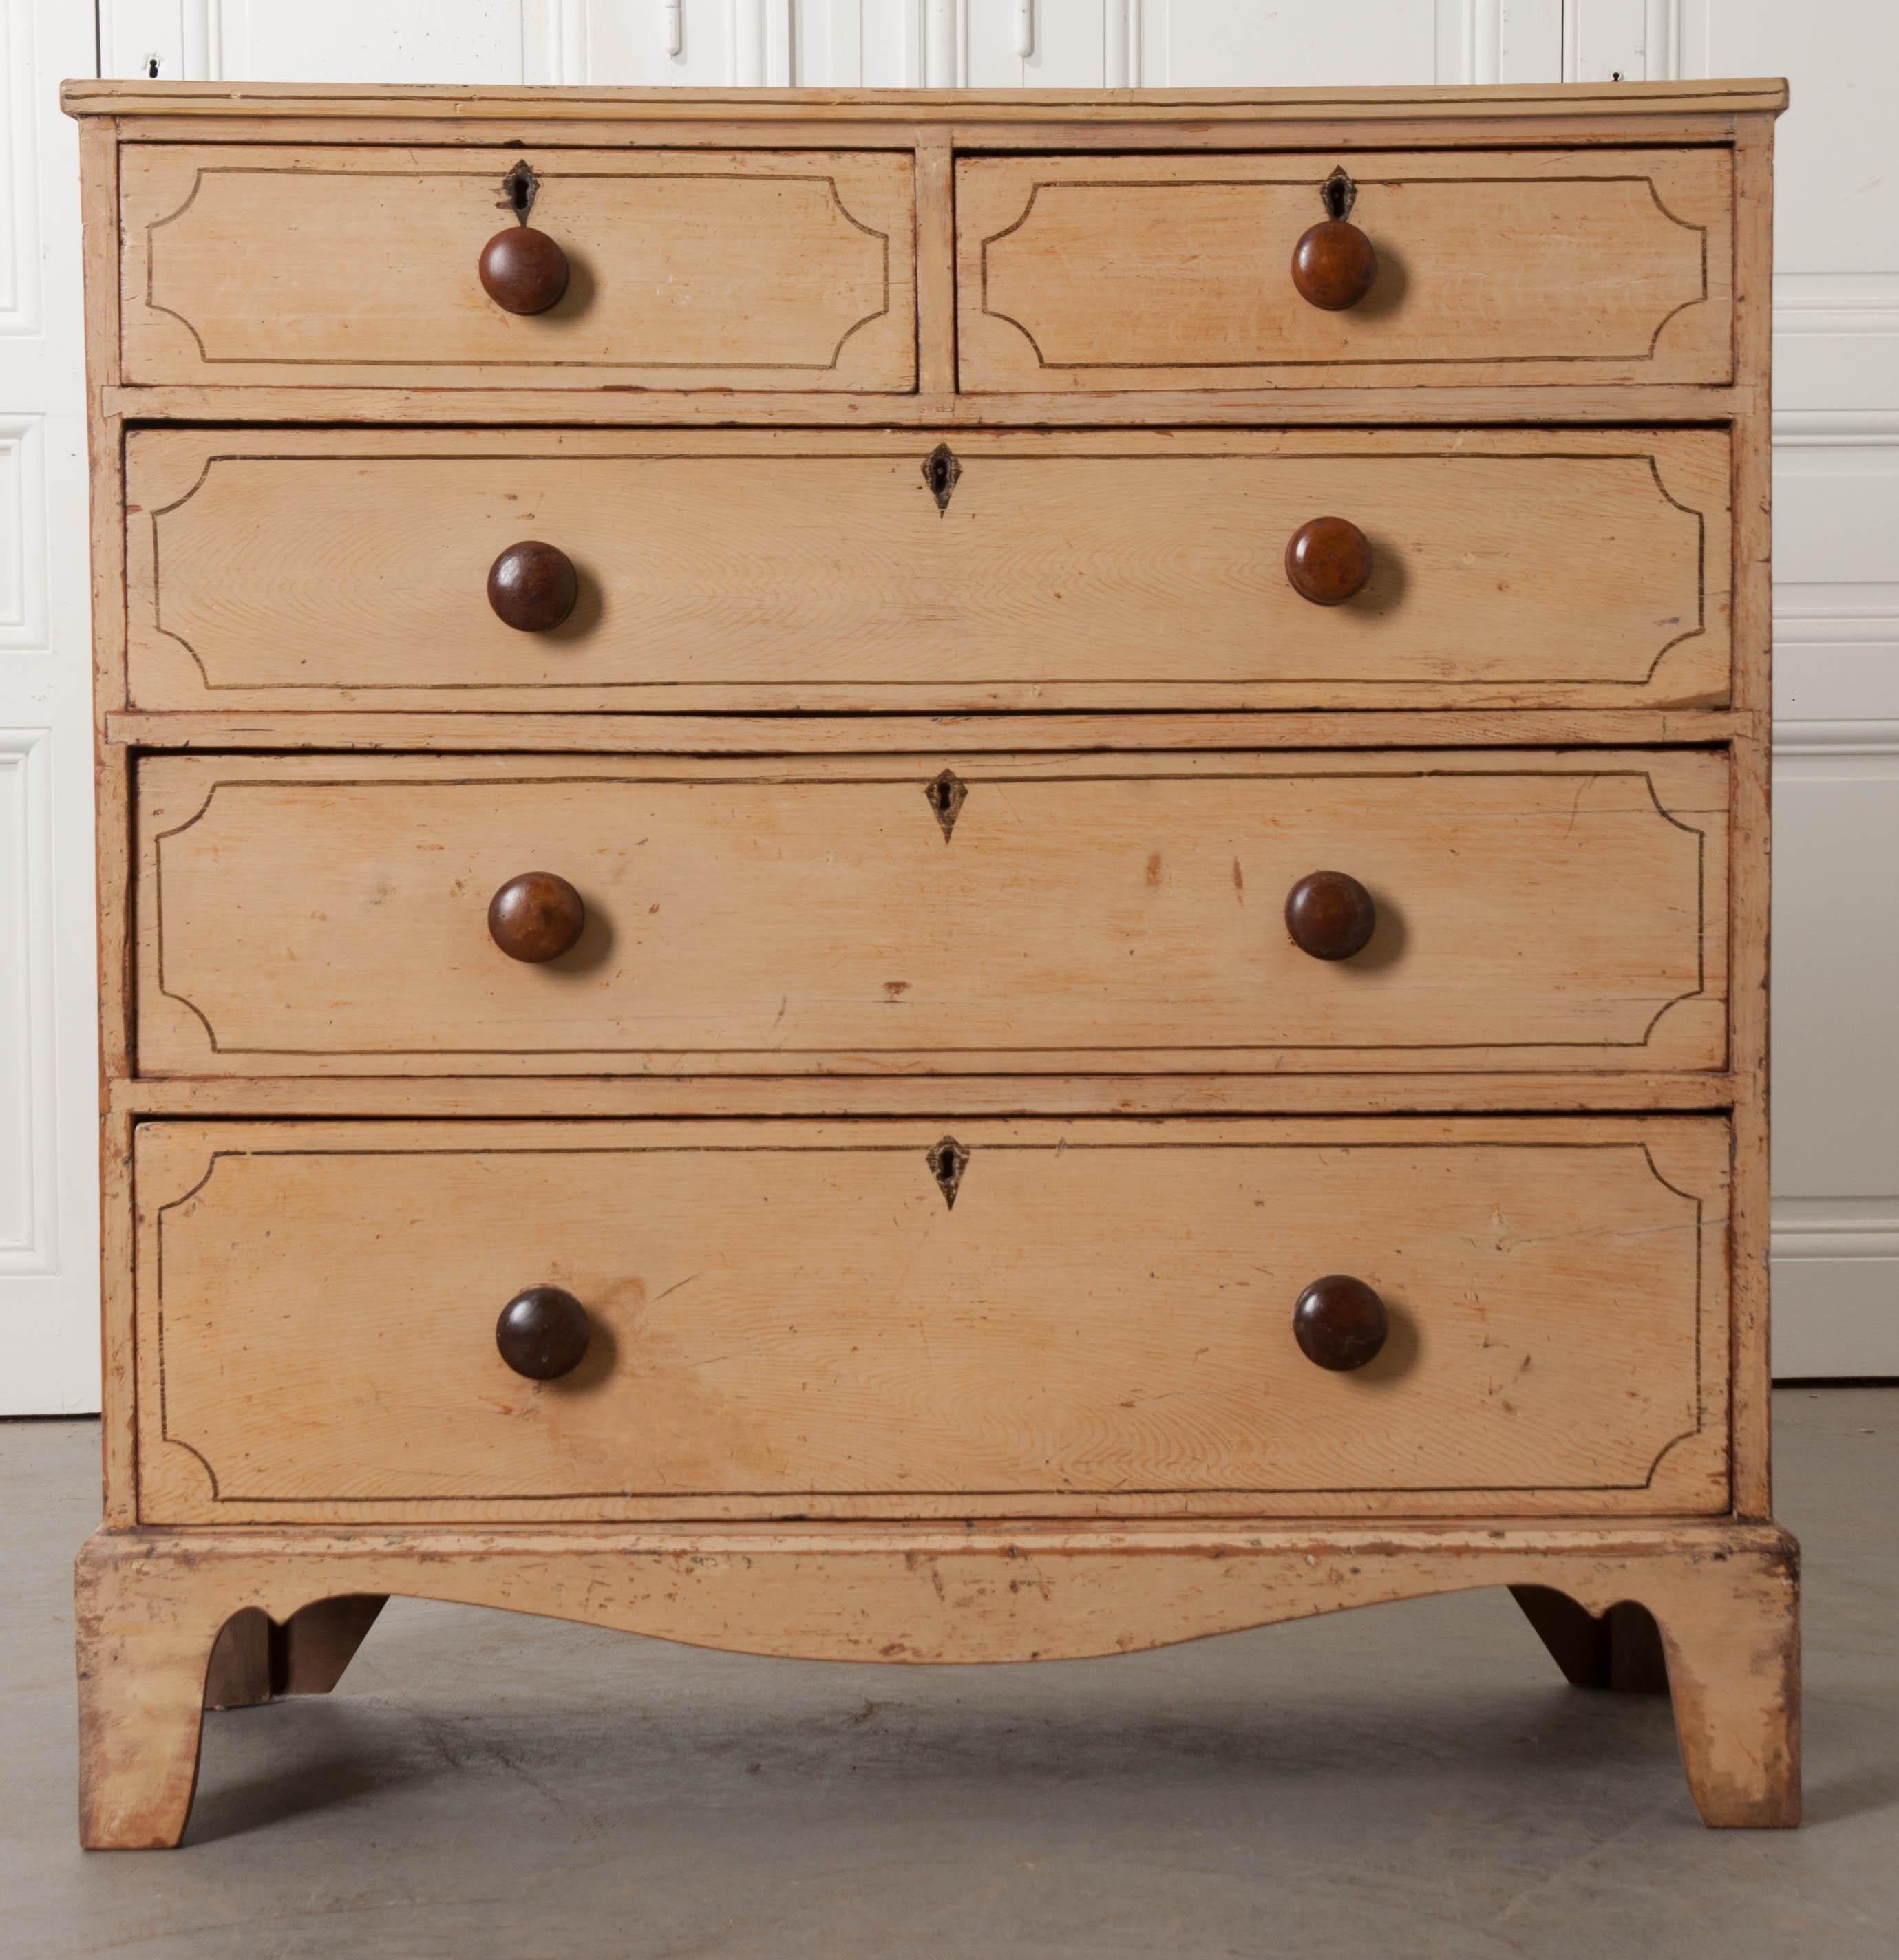 A wonderful painted pine chest of drawers, made in England, circa 1890. This five-drawer chest has been painted with sweet trimmed details, done in a dark brown tone, over a mellow, antiqued creamy yellow. The topmost drawers are half the size of